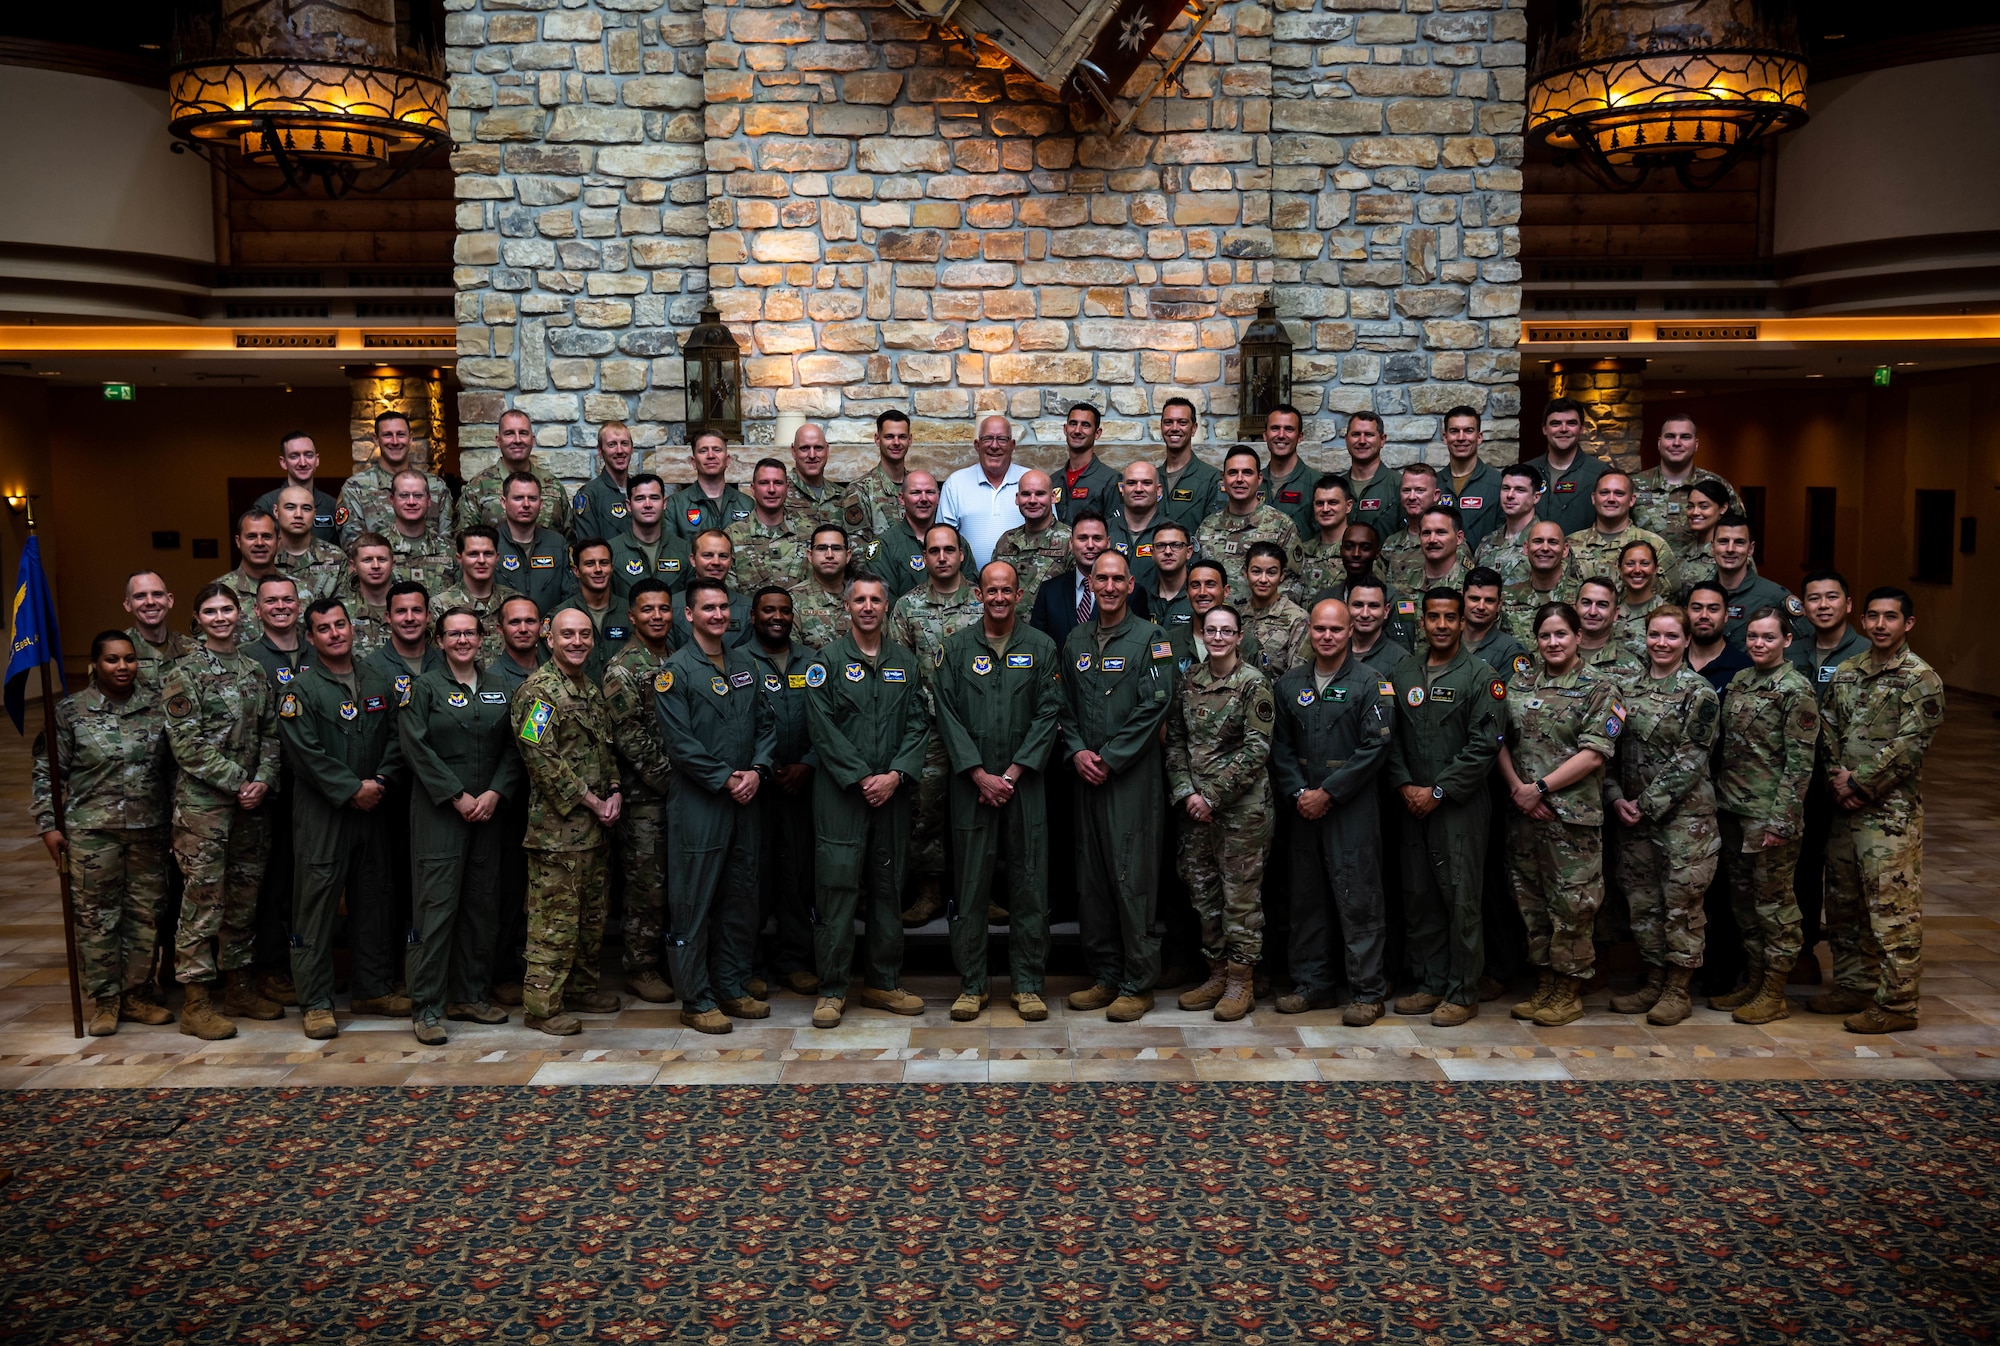 Members of the Military Personnel Exchange Program annual forum stand for a photo at Edelweiss Lodge and Resort, in Garmisch-Partenkirchen, Germany.